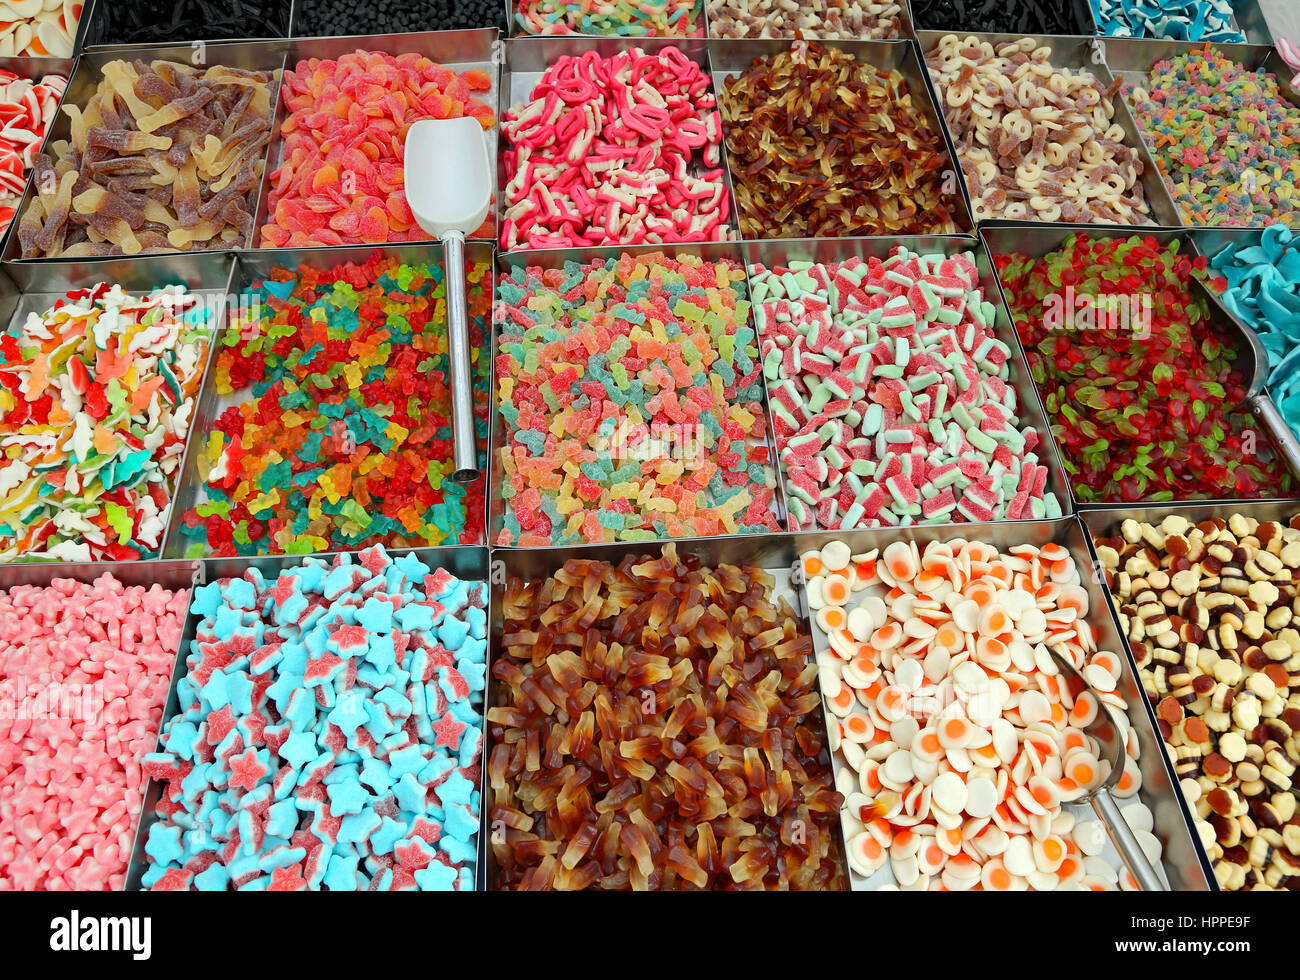 sugar candy on sale in market stall Stock Photo